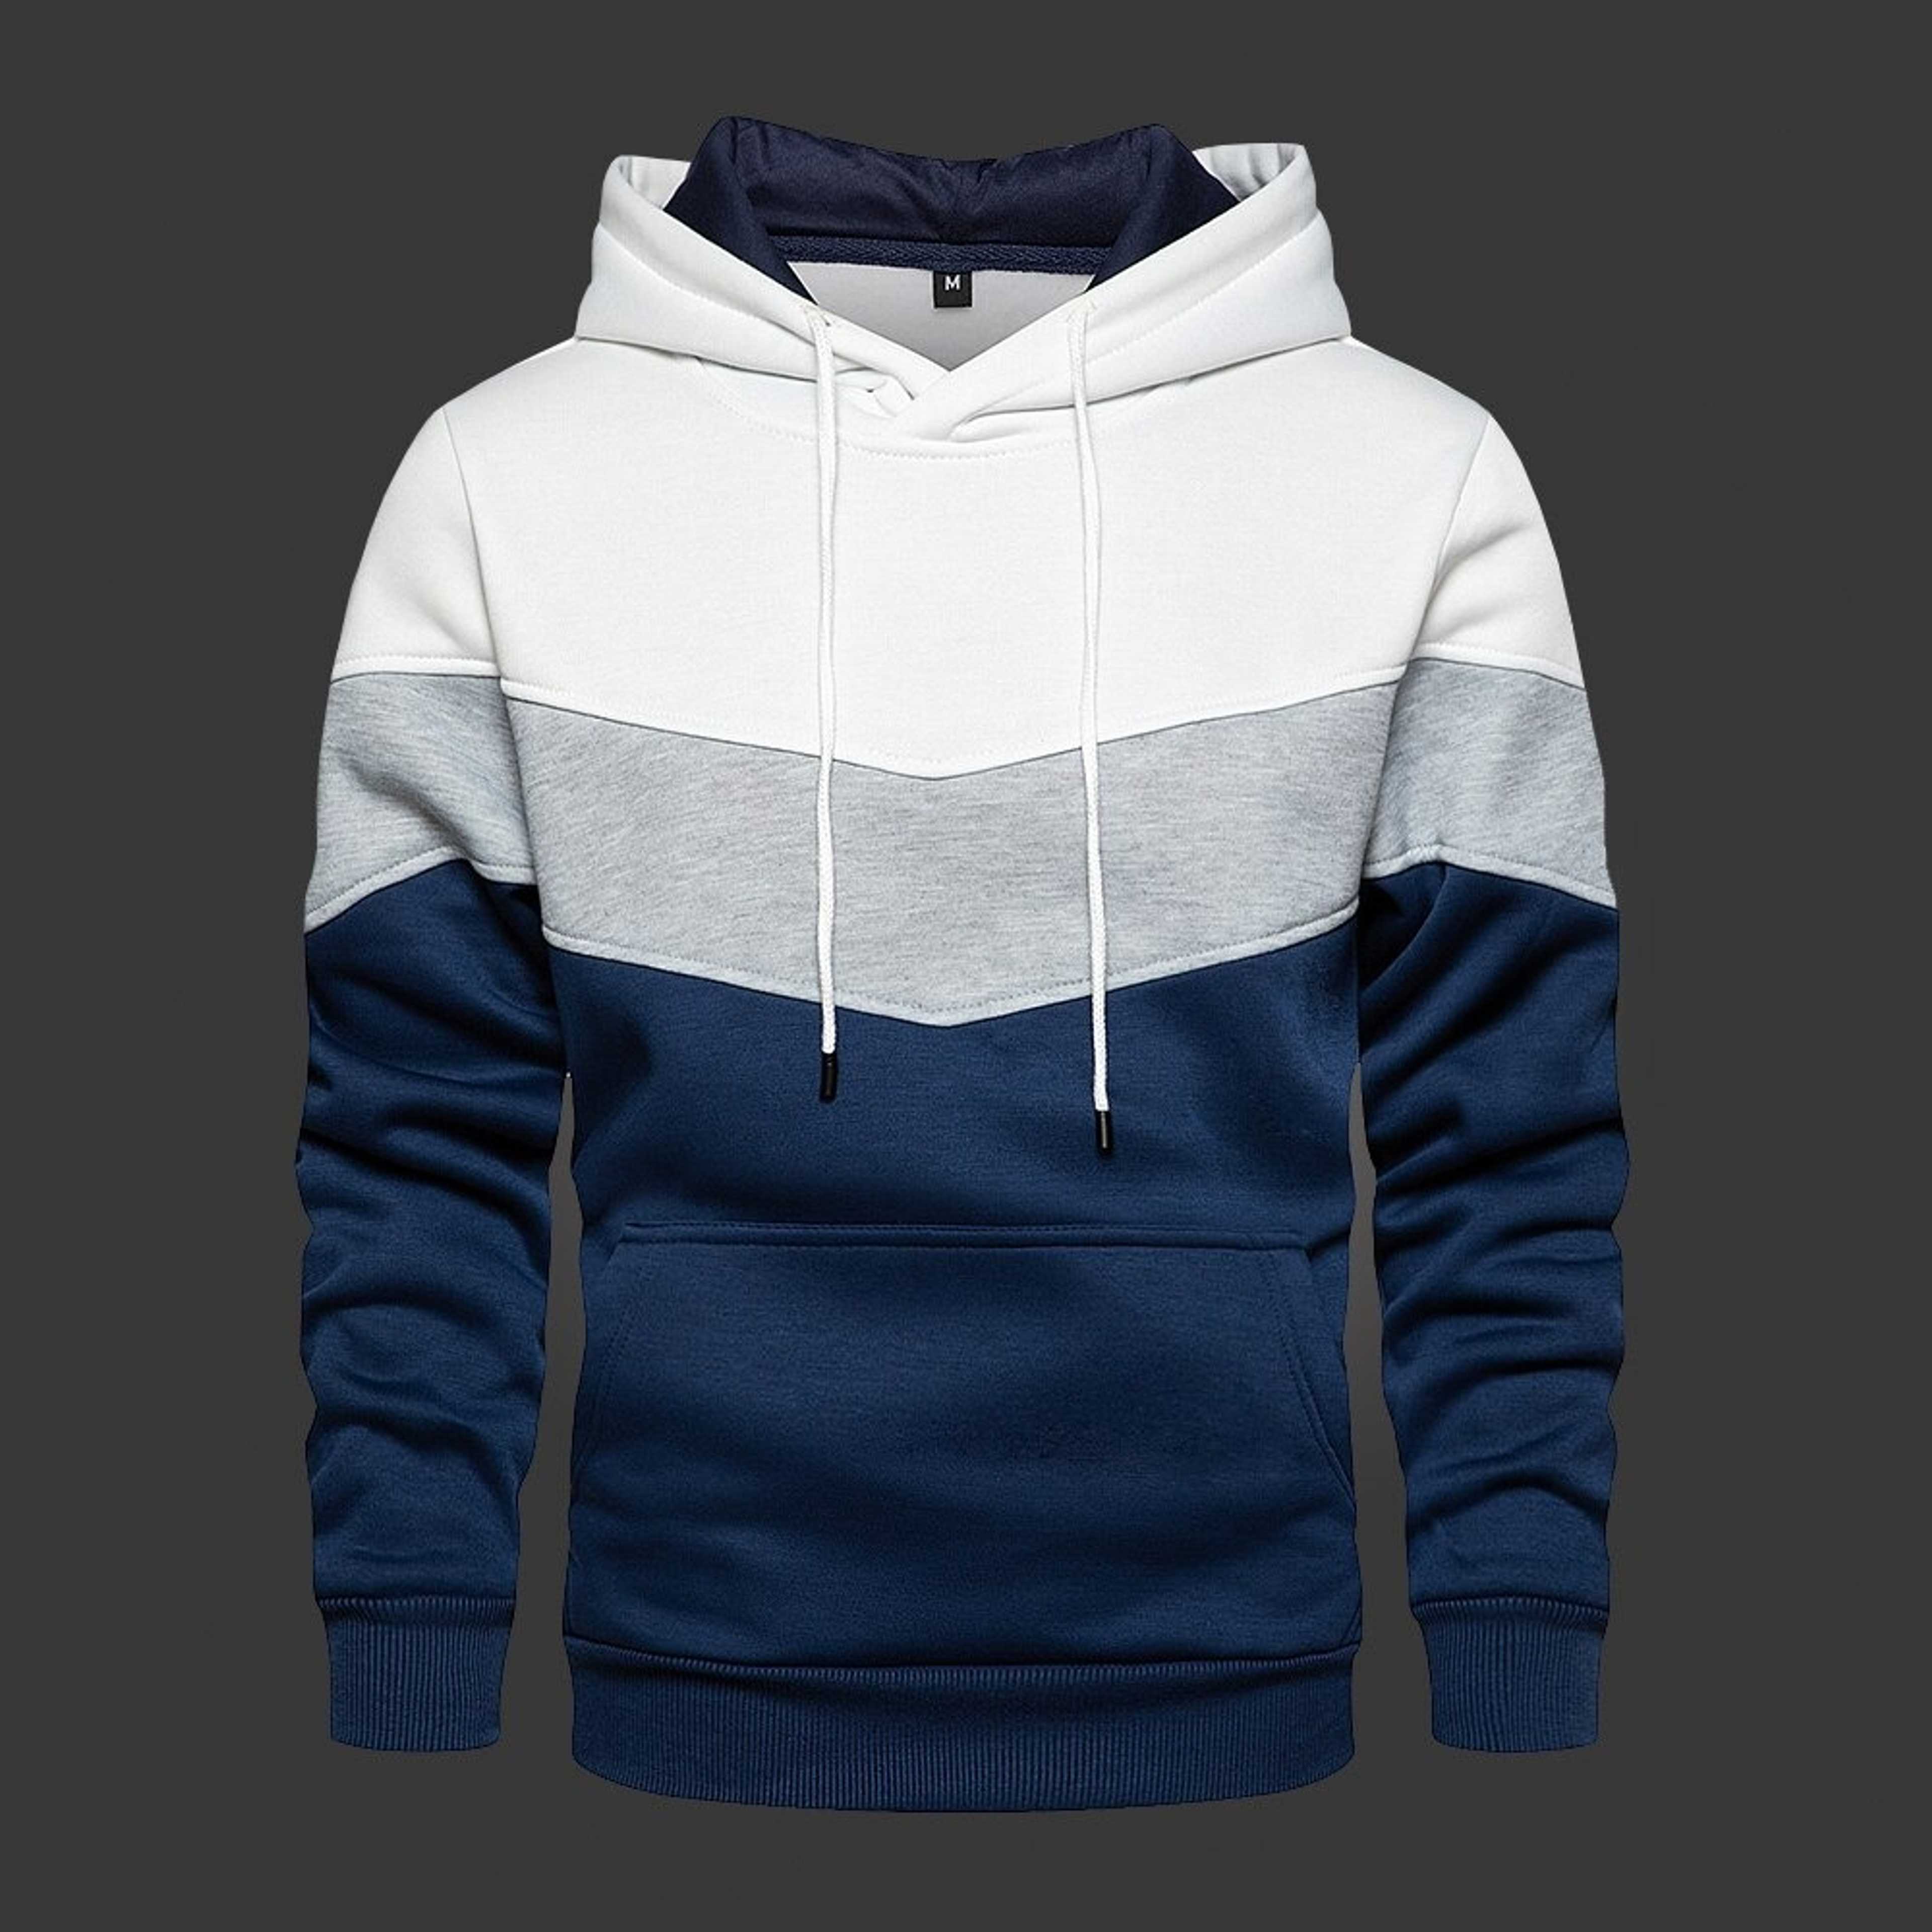 Best Quality Hoodie for Men